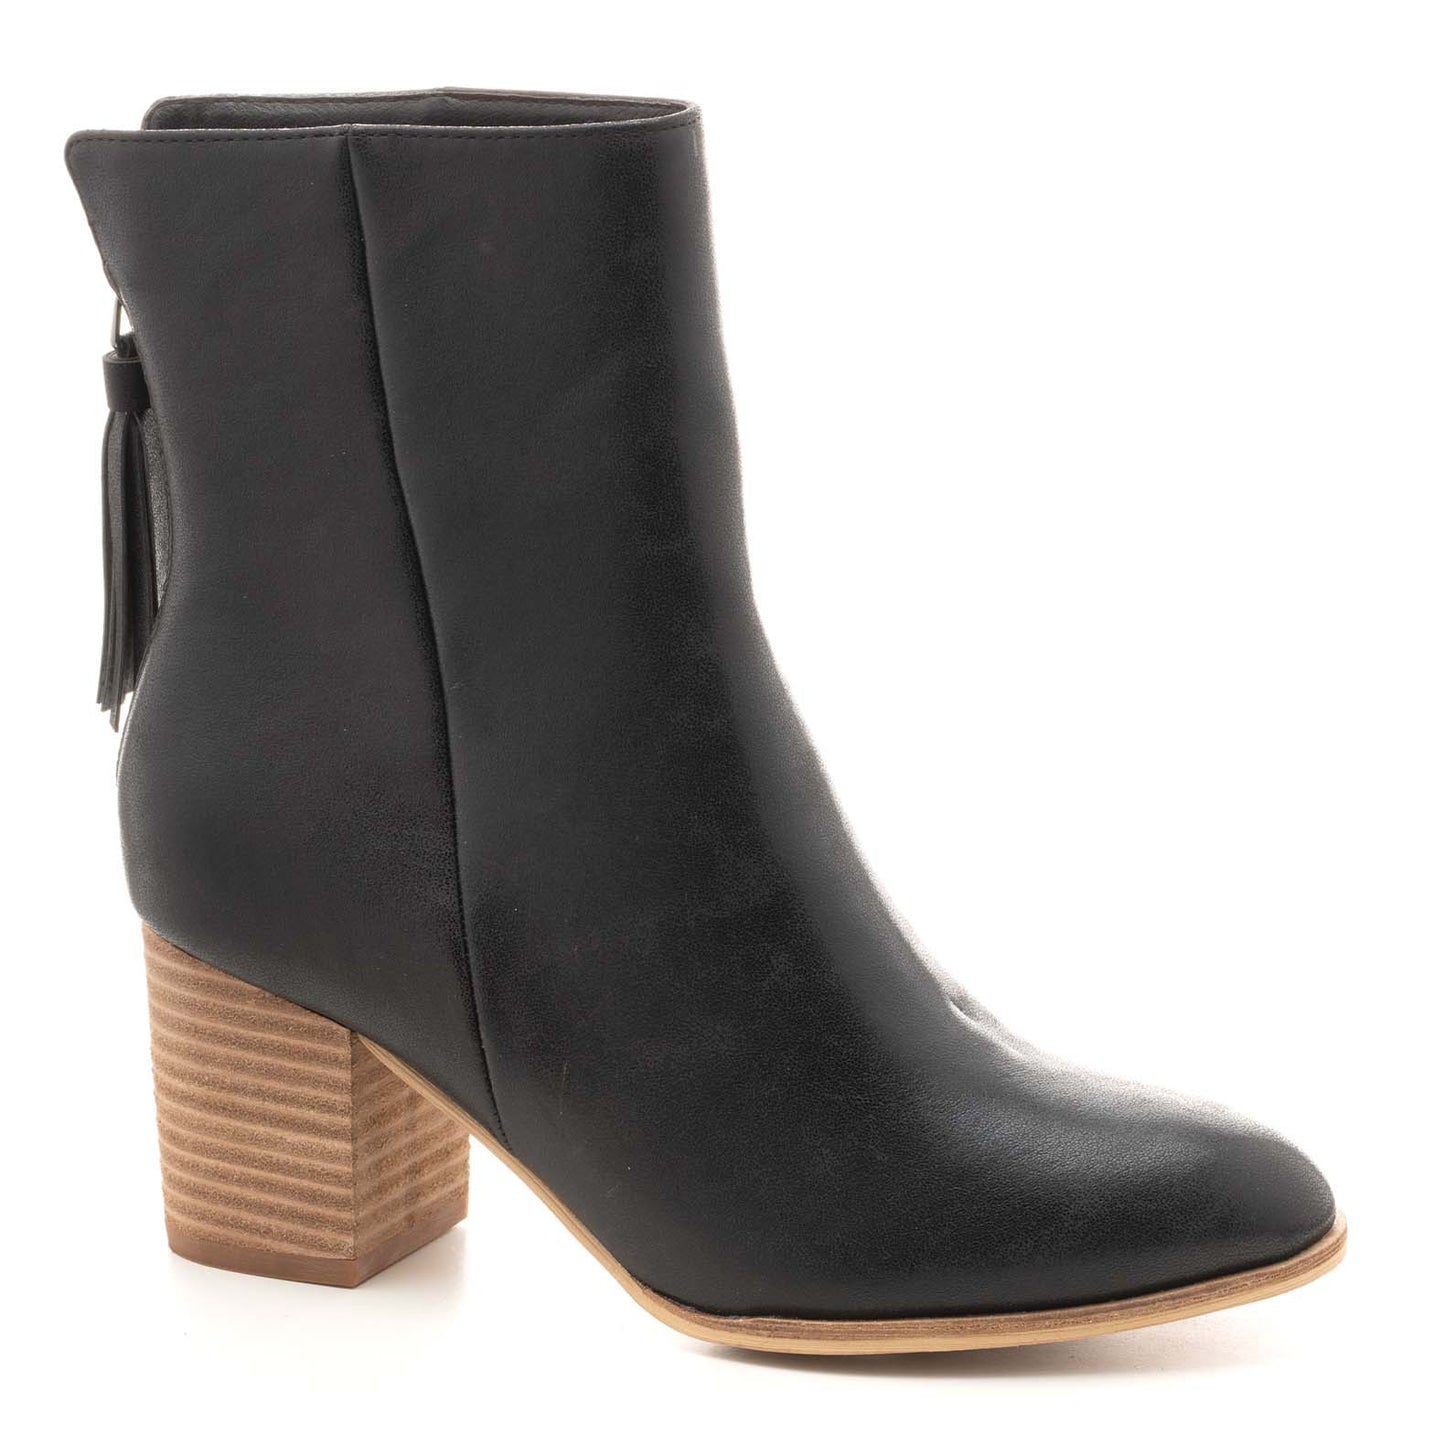 Corky's Boujee Boot in Black Smooth